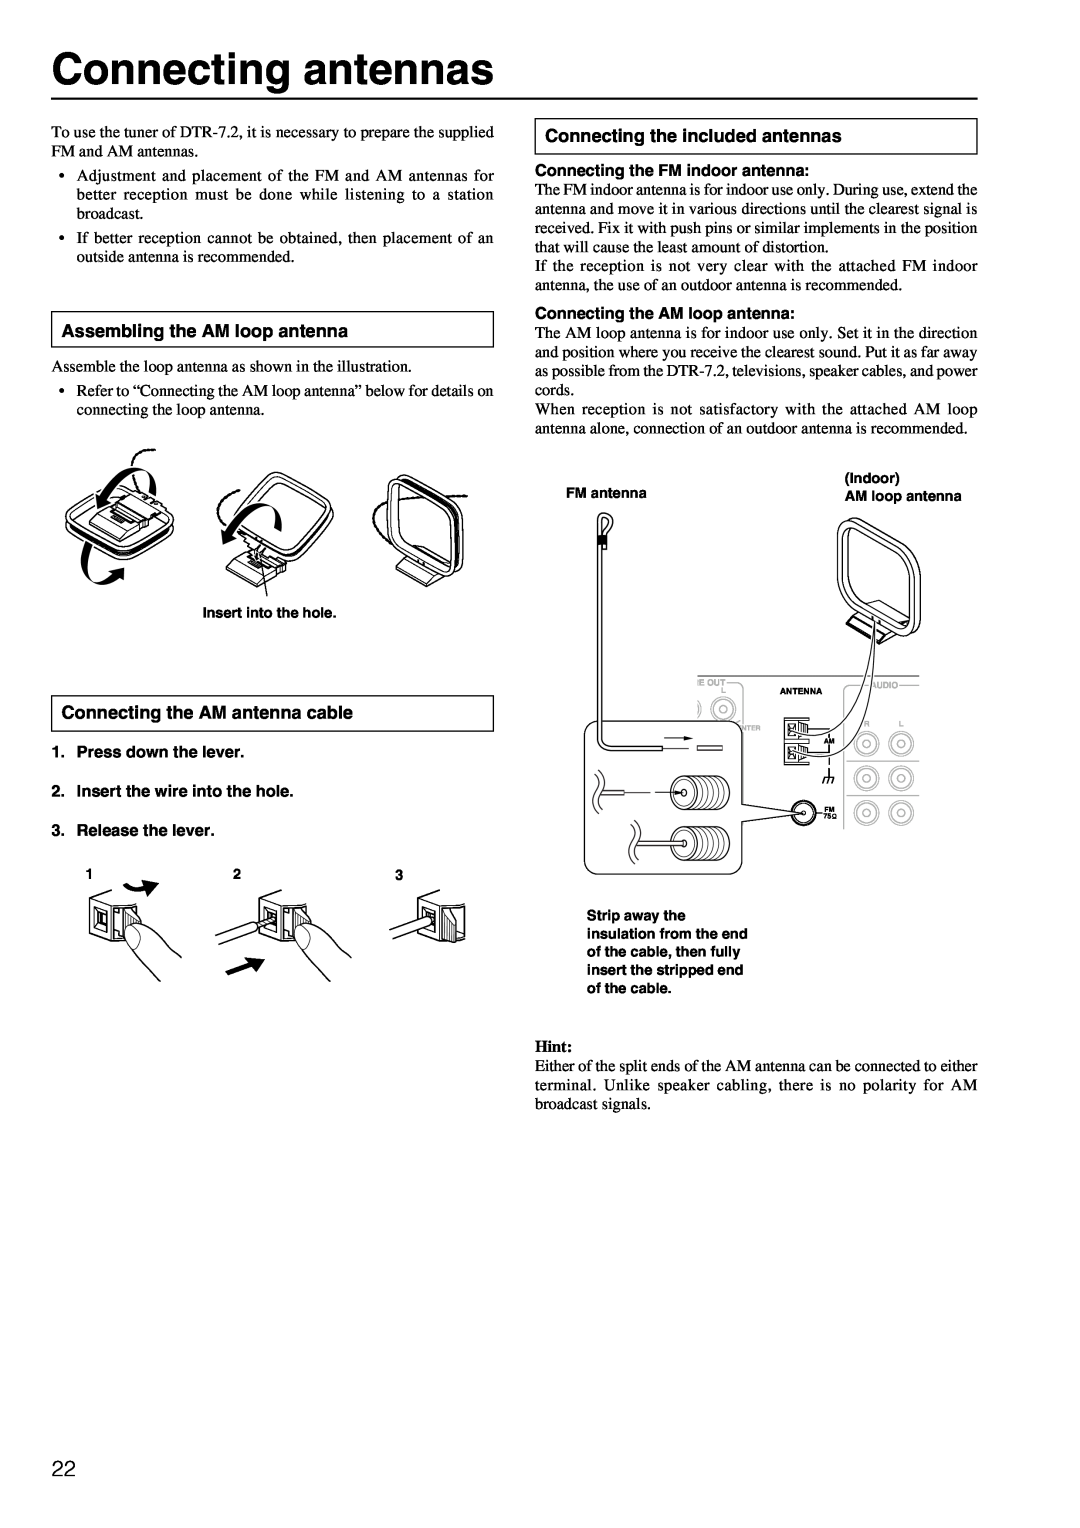 Integra DTR-7.2 instruction manual Connecting antennas, Assembling the AM loop antenna, Connecting the AM antenna cable 